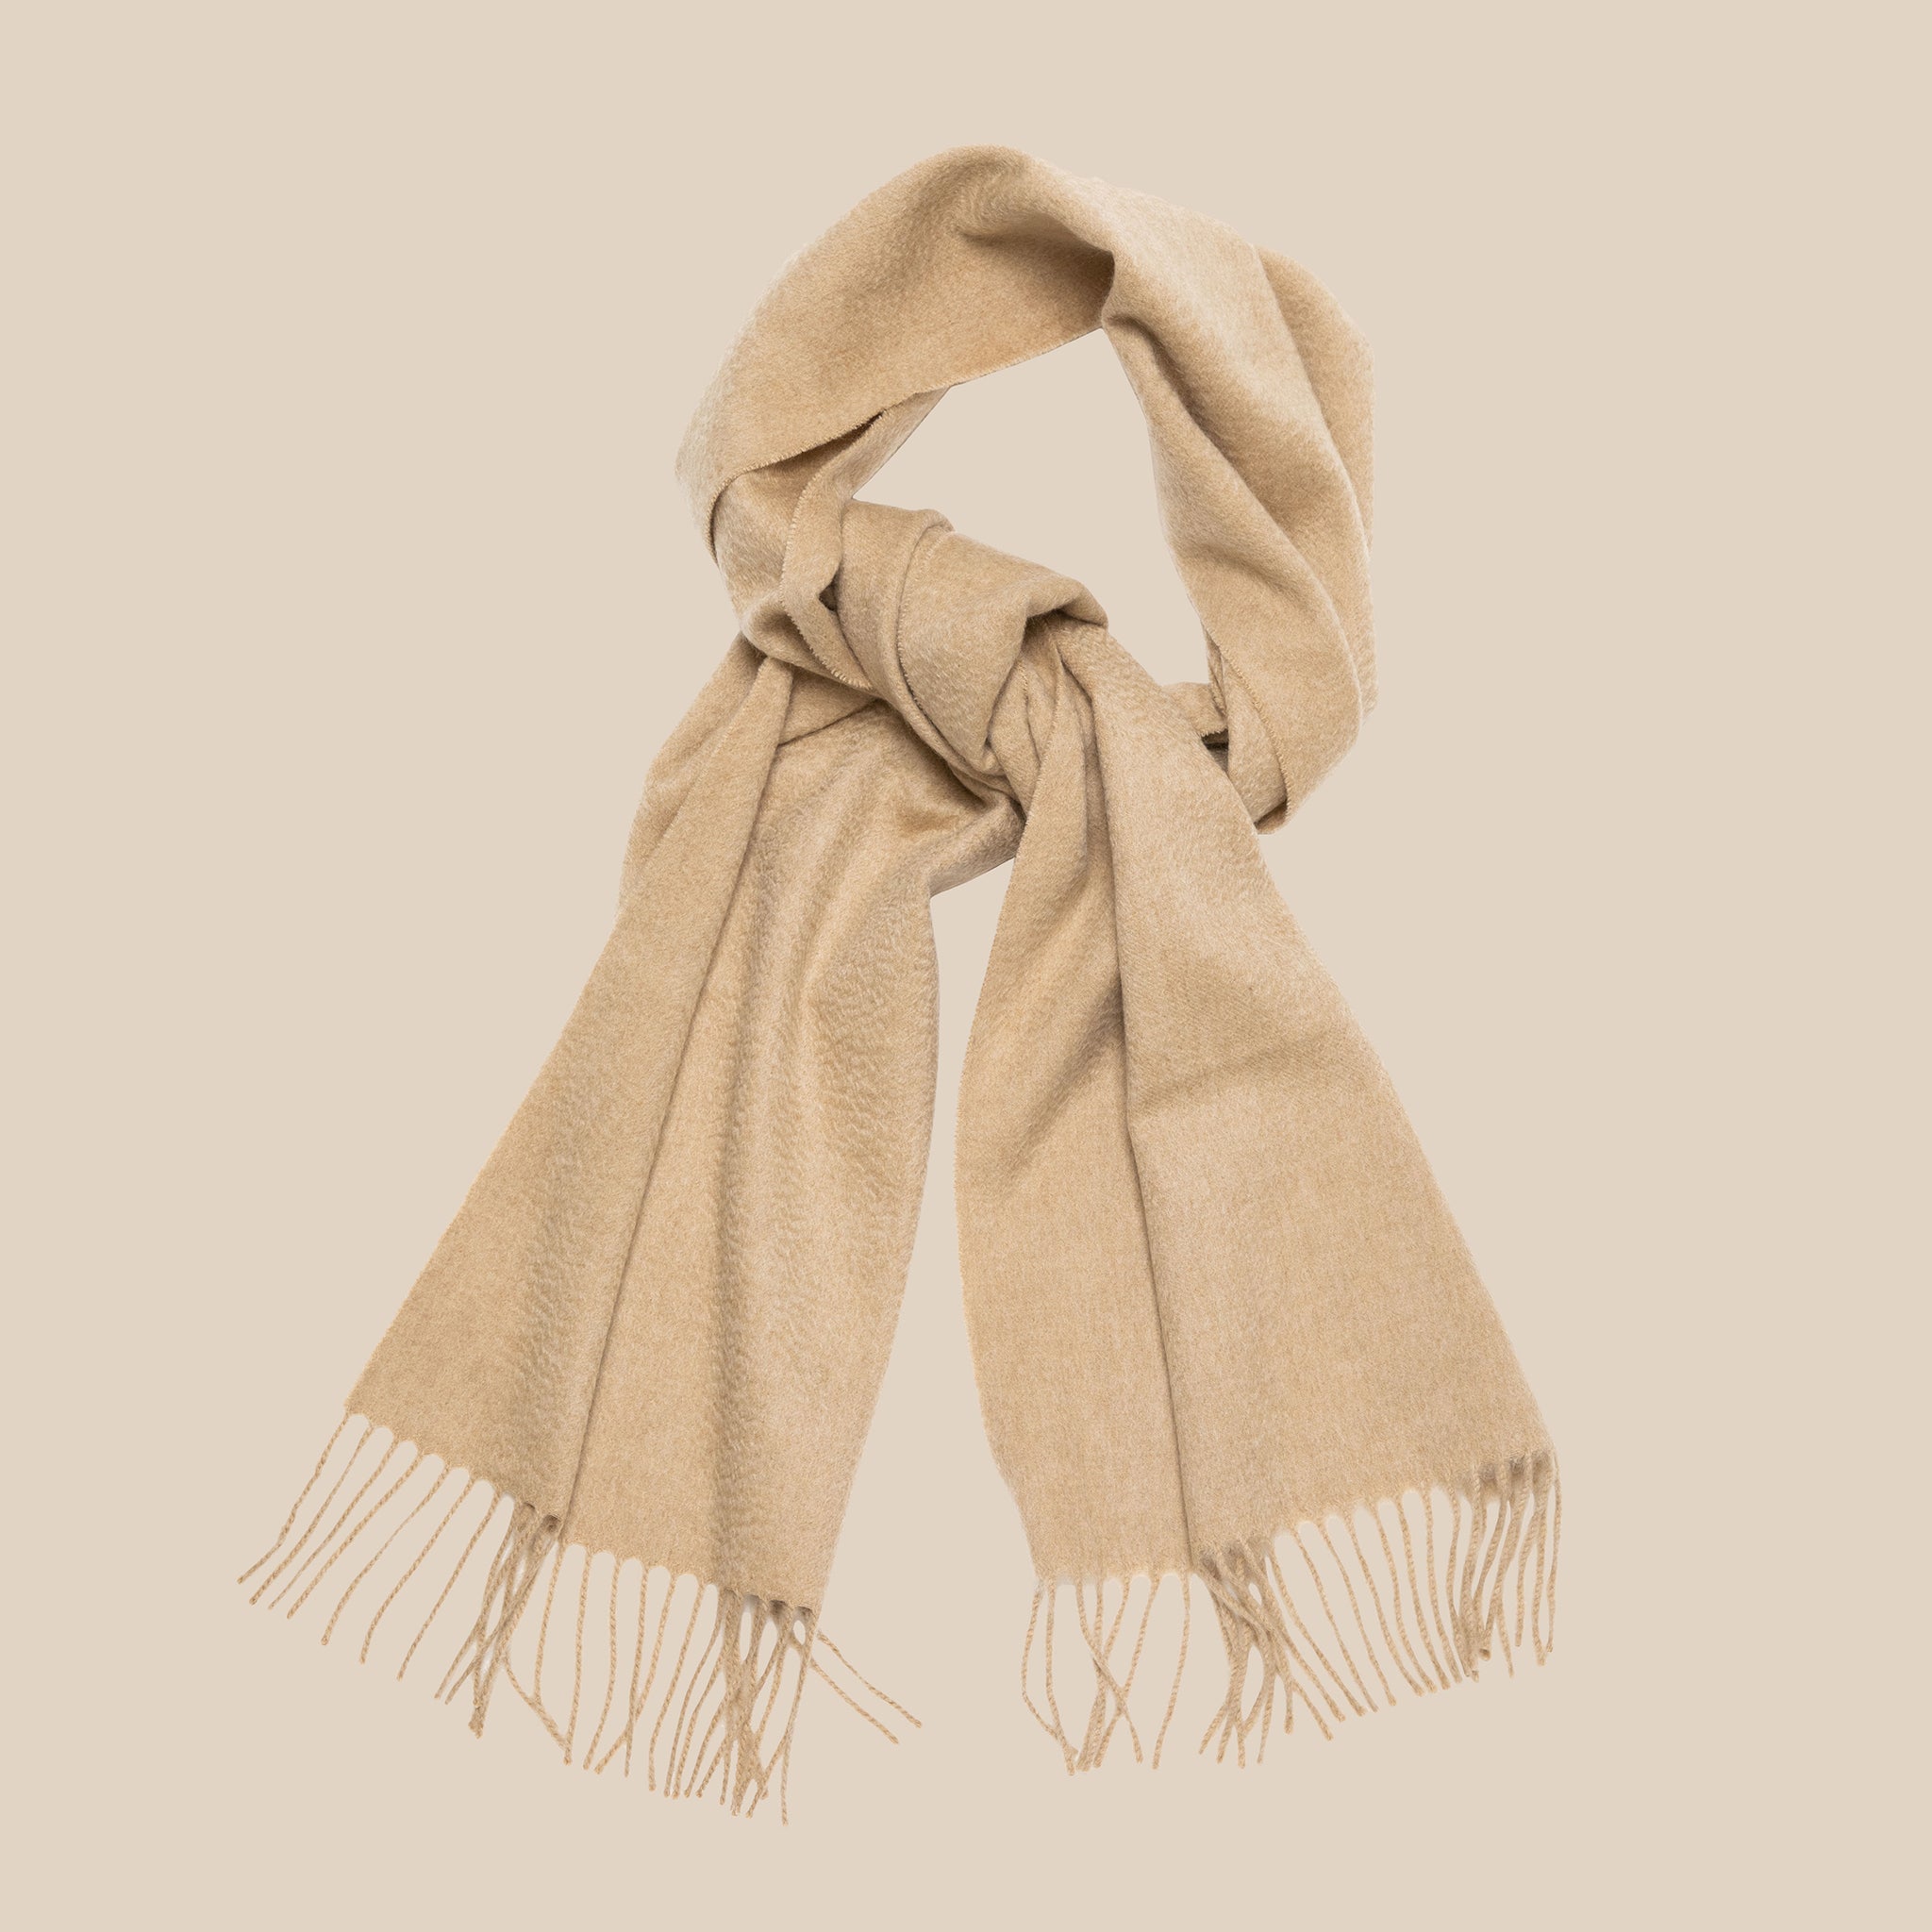 Woven Cashmere Scarf in Oatmeal